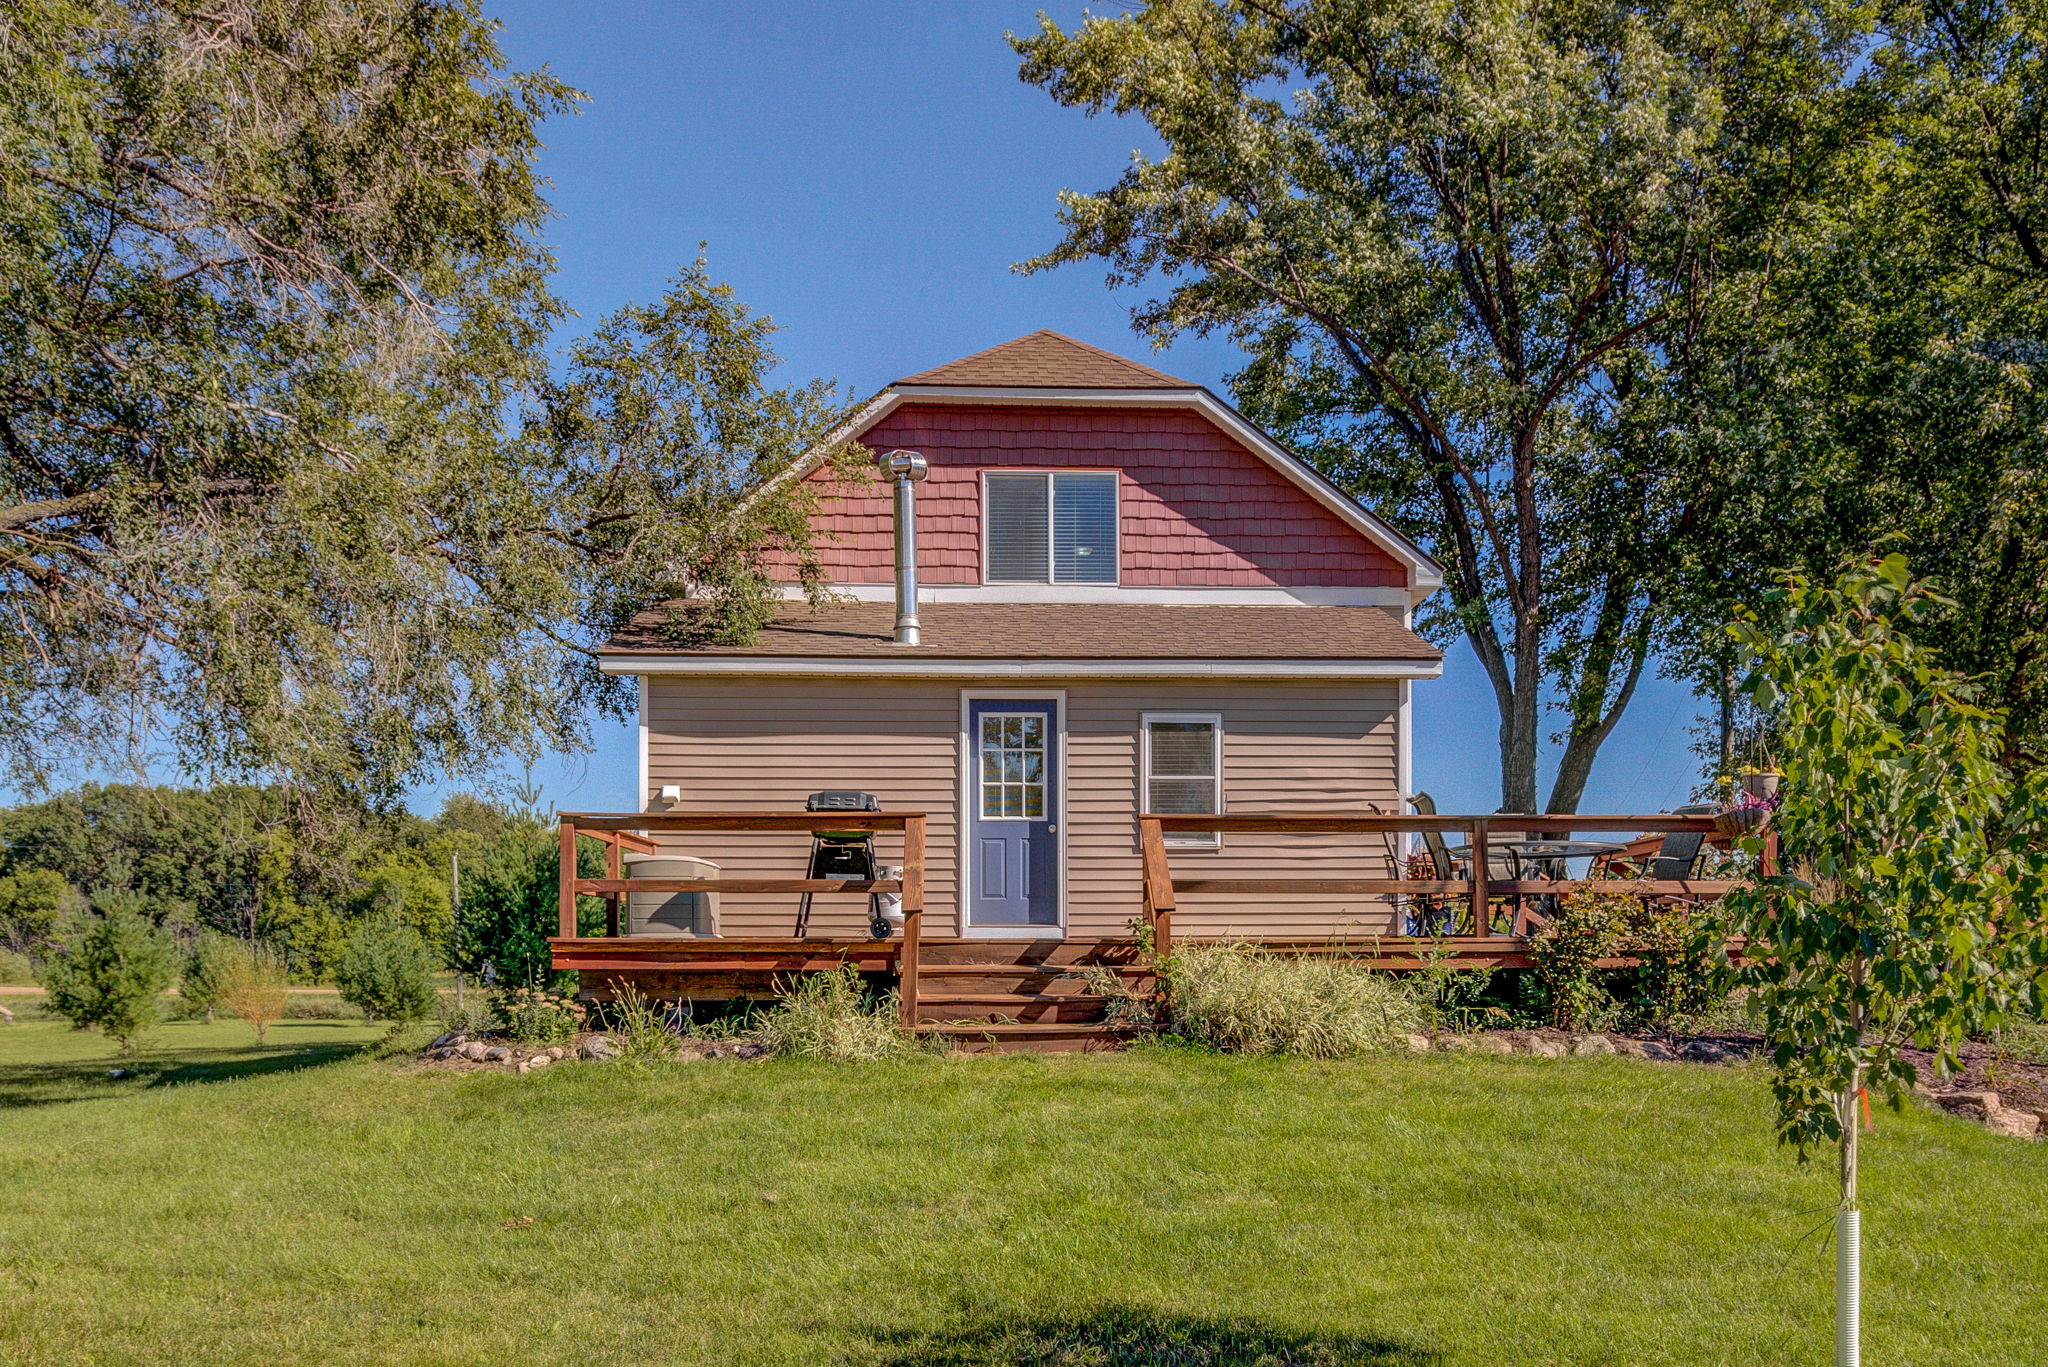  17580 County Rd 40, Carver, MN 55315, US